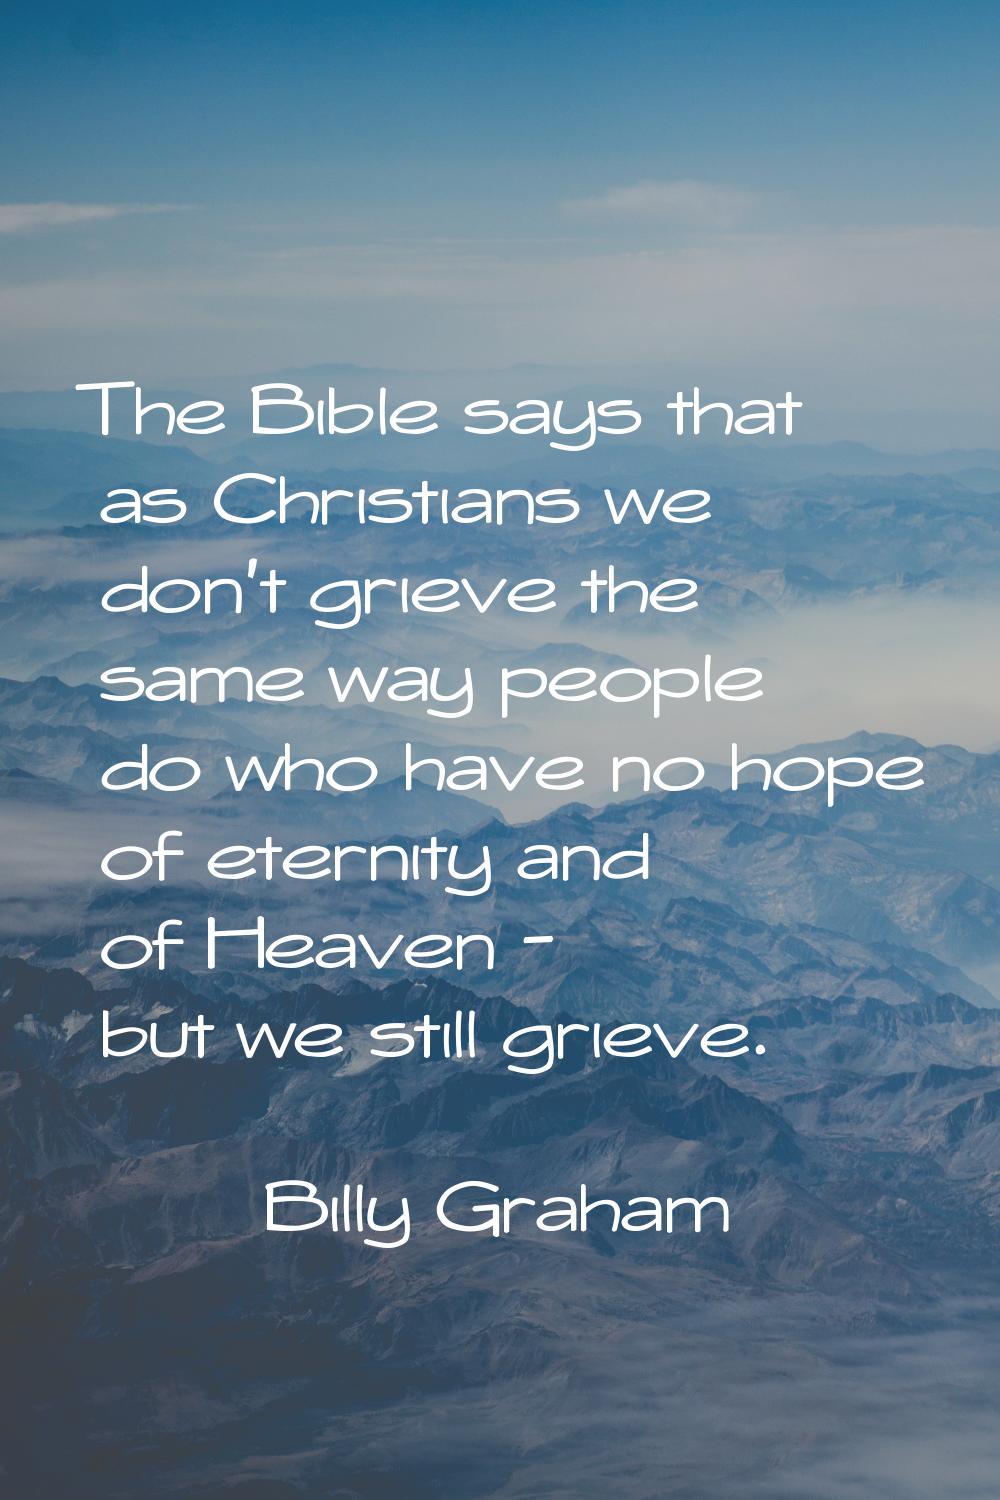 The Bible says that as Christians we don't grieve the same way people do who have no hope of eterni